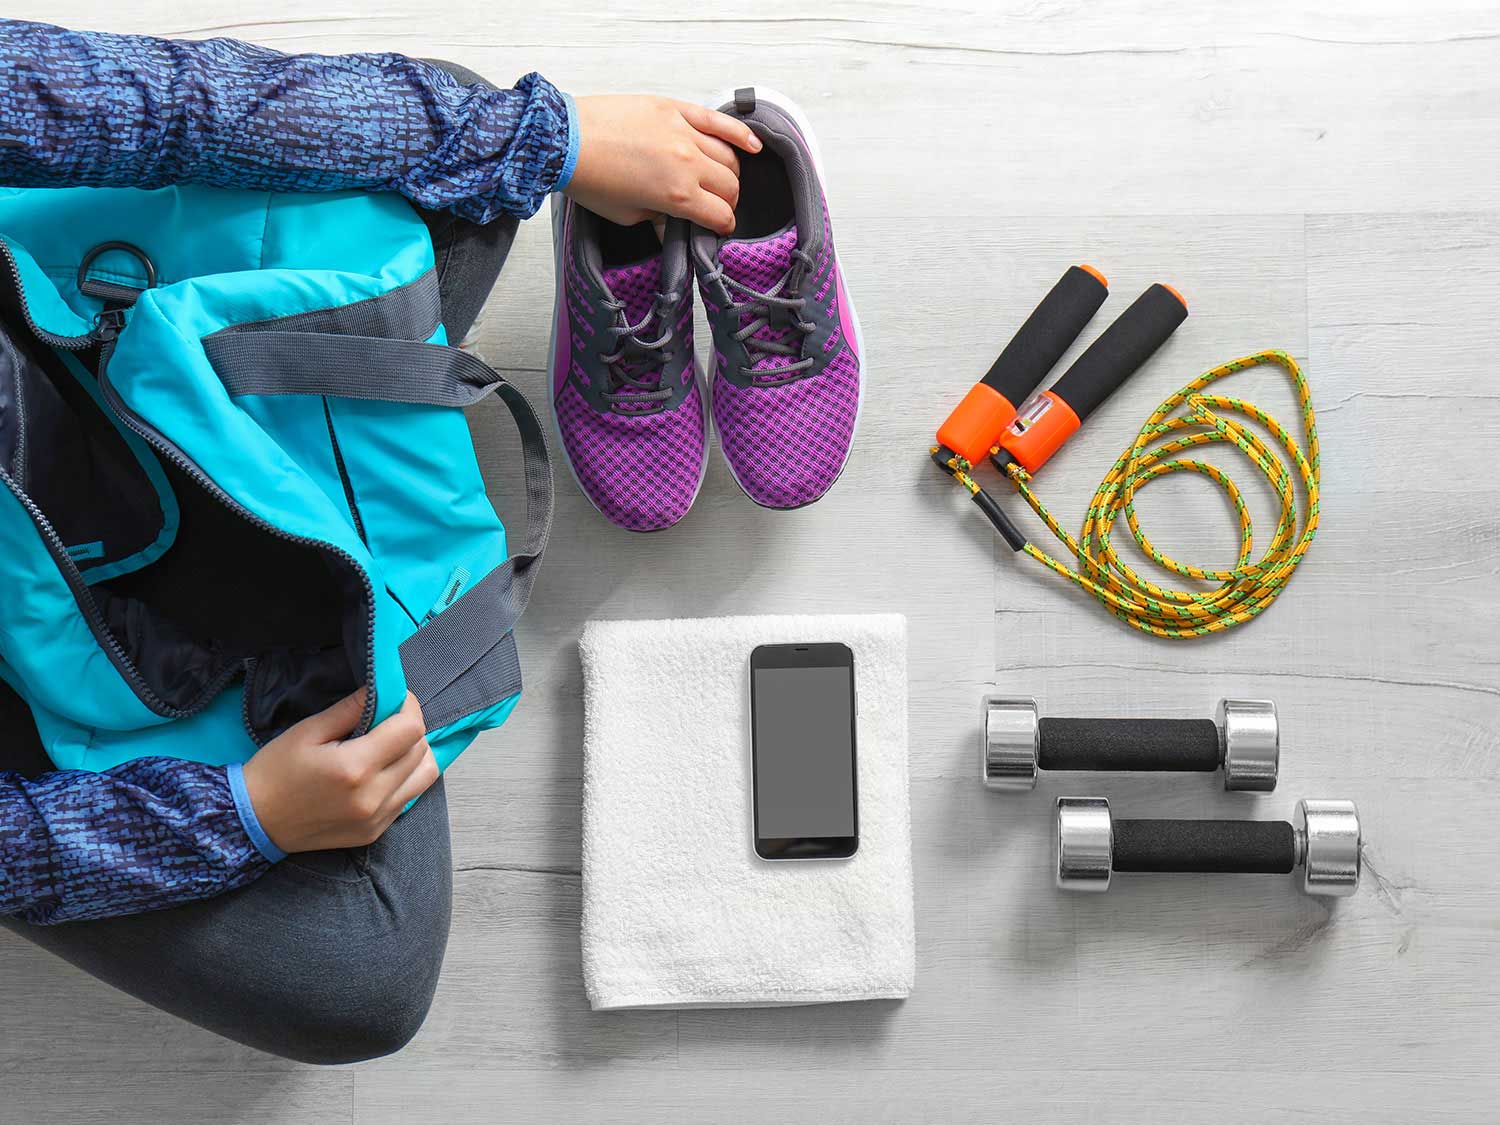 Woman packing tennis shoes, jump rope, weights, towel, and phone.